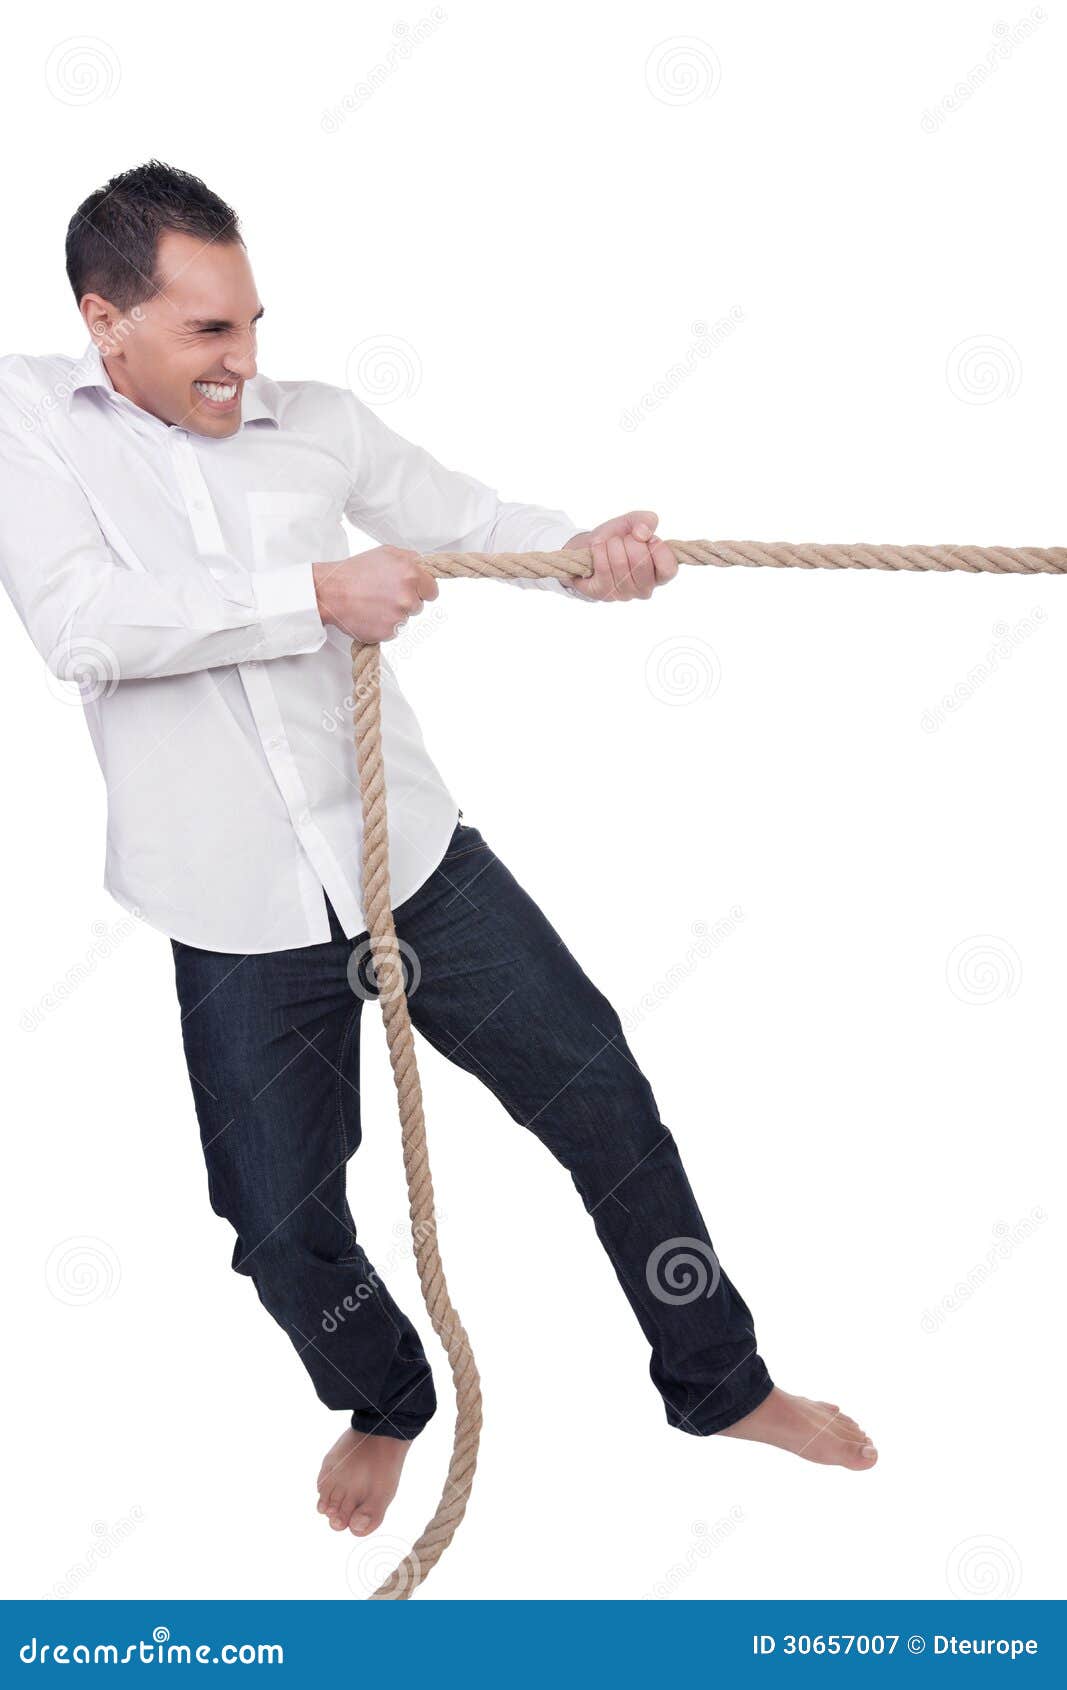 https://thumbs.dreamstime.com/z/man-pulling-rope-barefoot-young-straining-backwards-grimace-his-face-full-body-studio-portrait-isolated-o-white-30657007.jpg